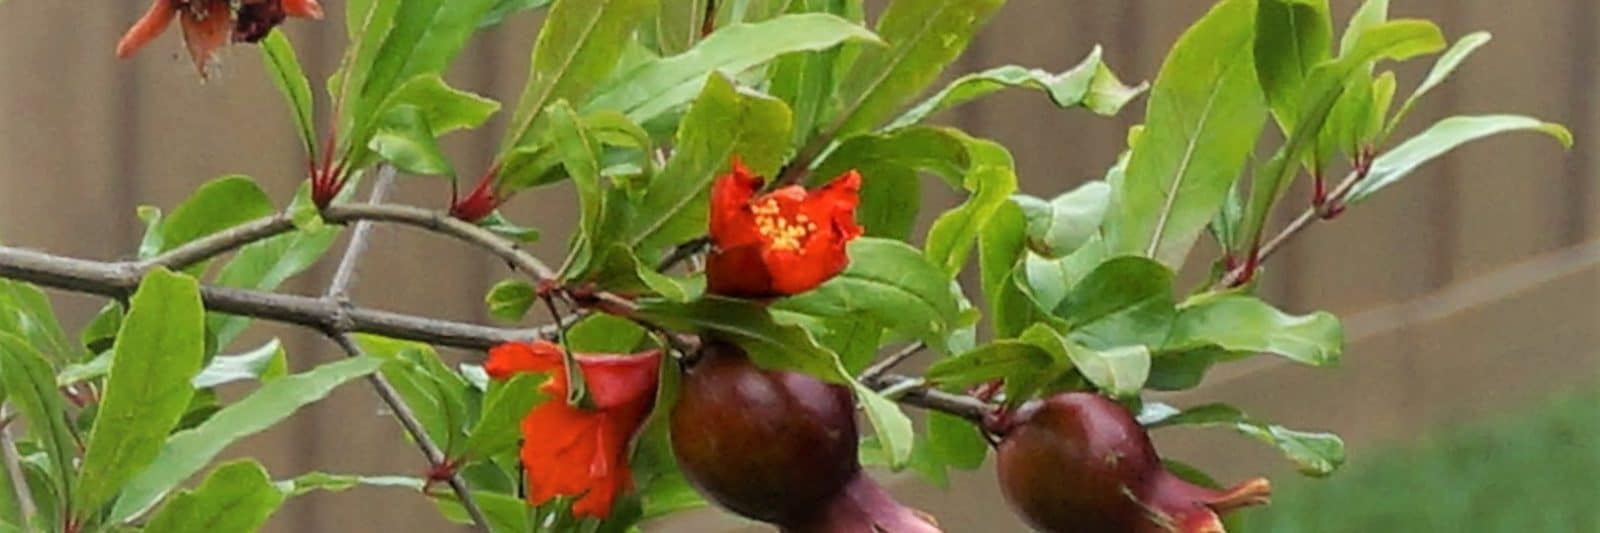 pomegranate branch of flowers and forming fruit